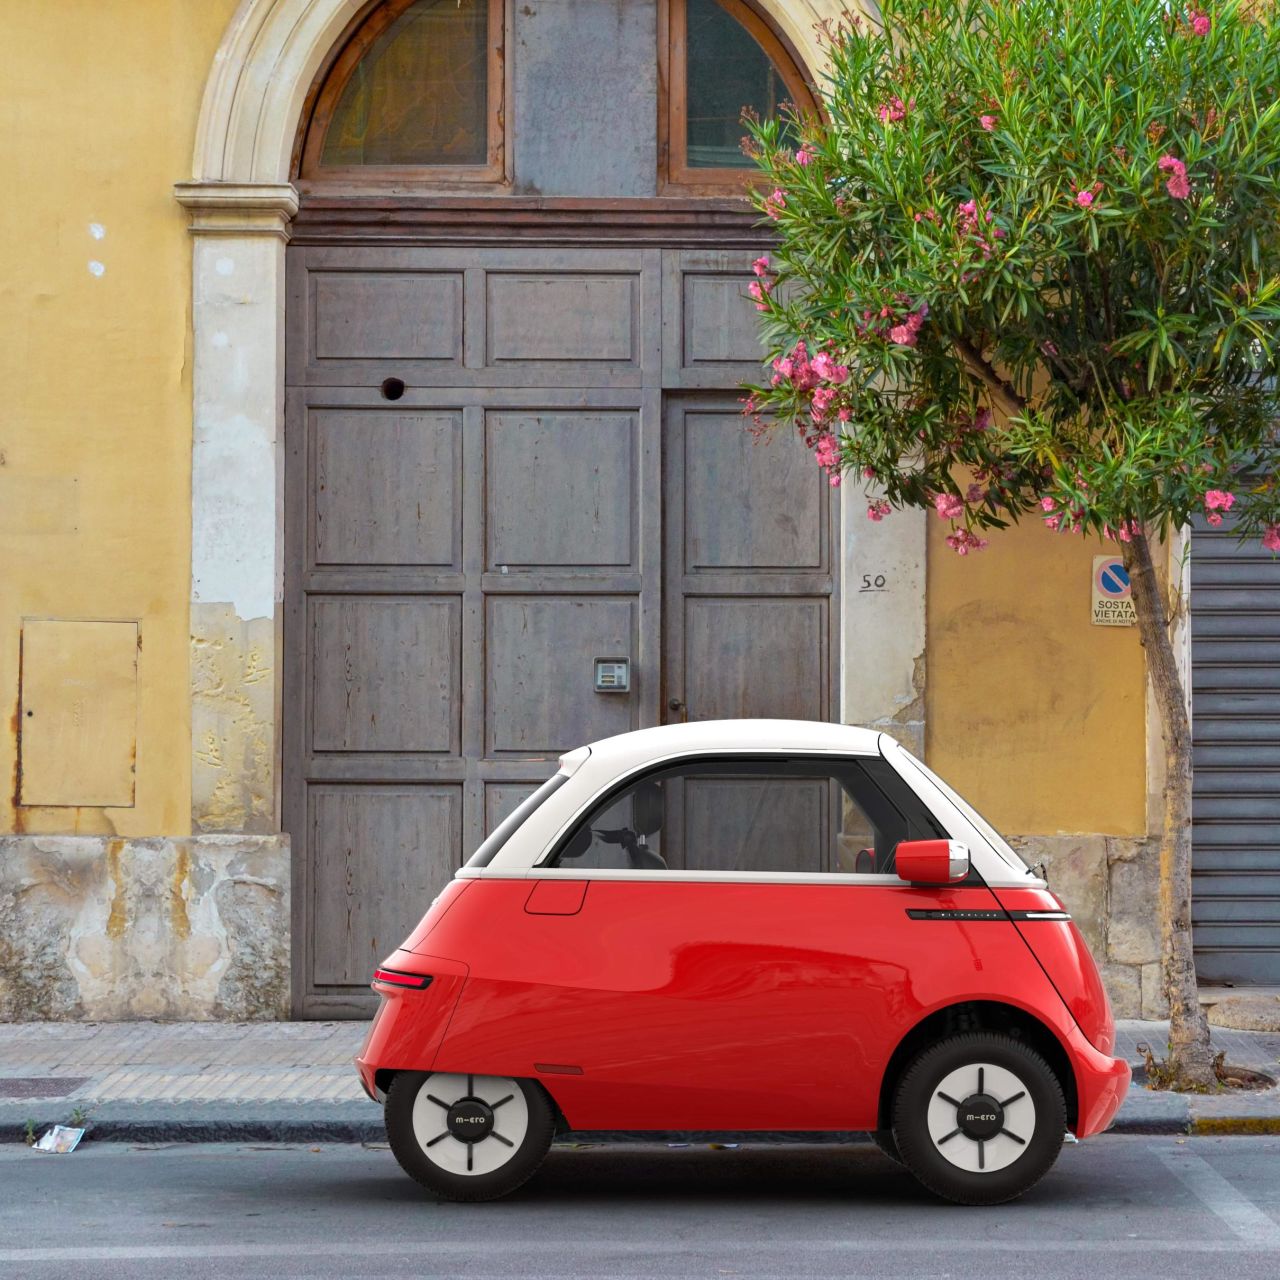 Swiss company Microlino is producing an electric vehicle with space for two passengers, which can be charged in four hours.